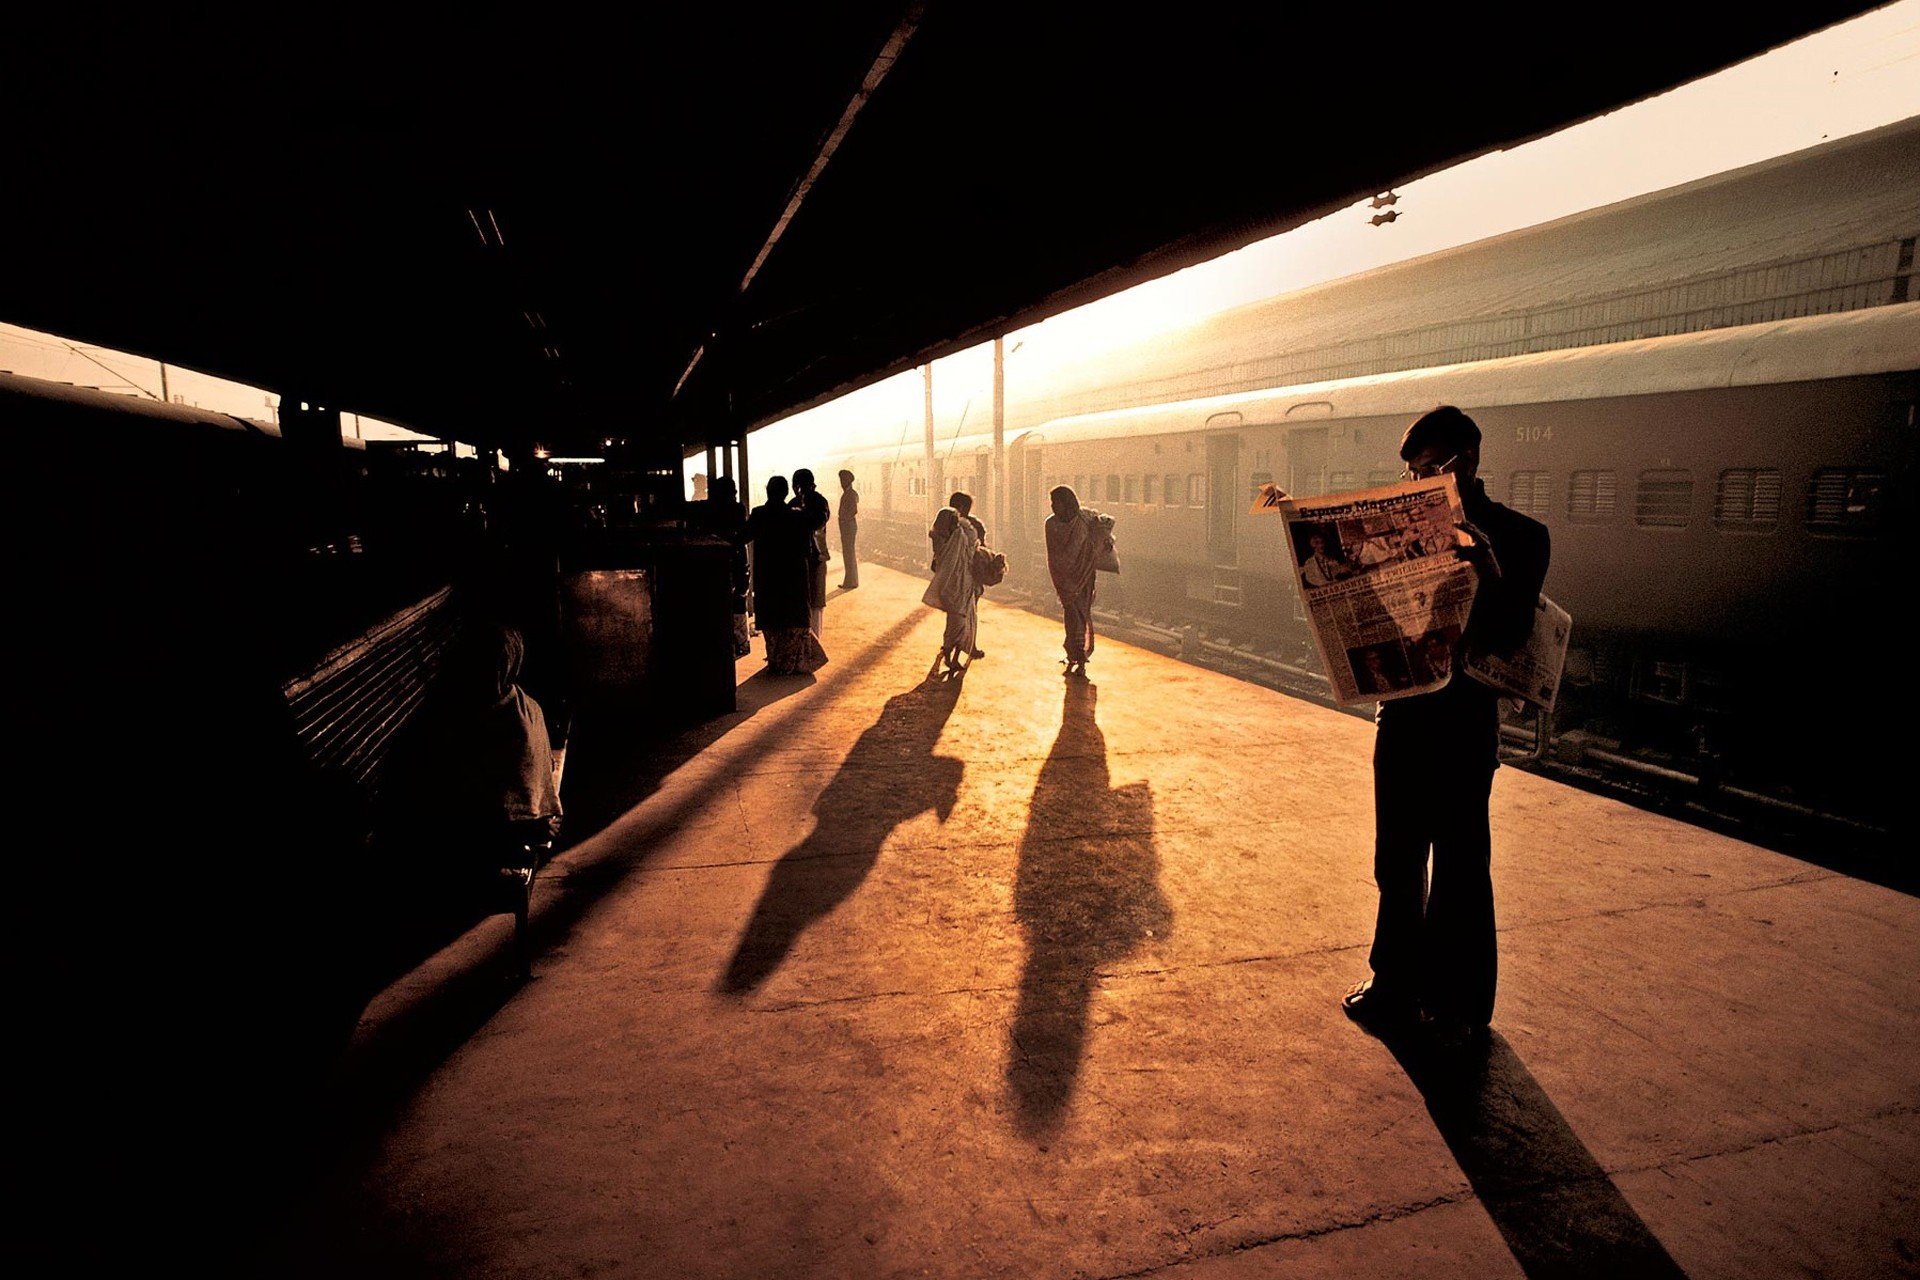 Steve McCurry, People, Photographer, India, Train station, Train, Photography Wallpaper